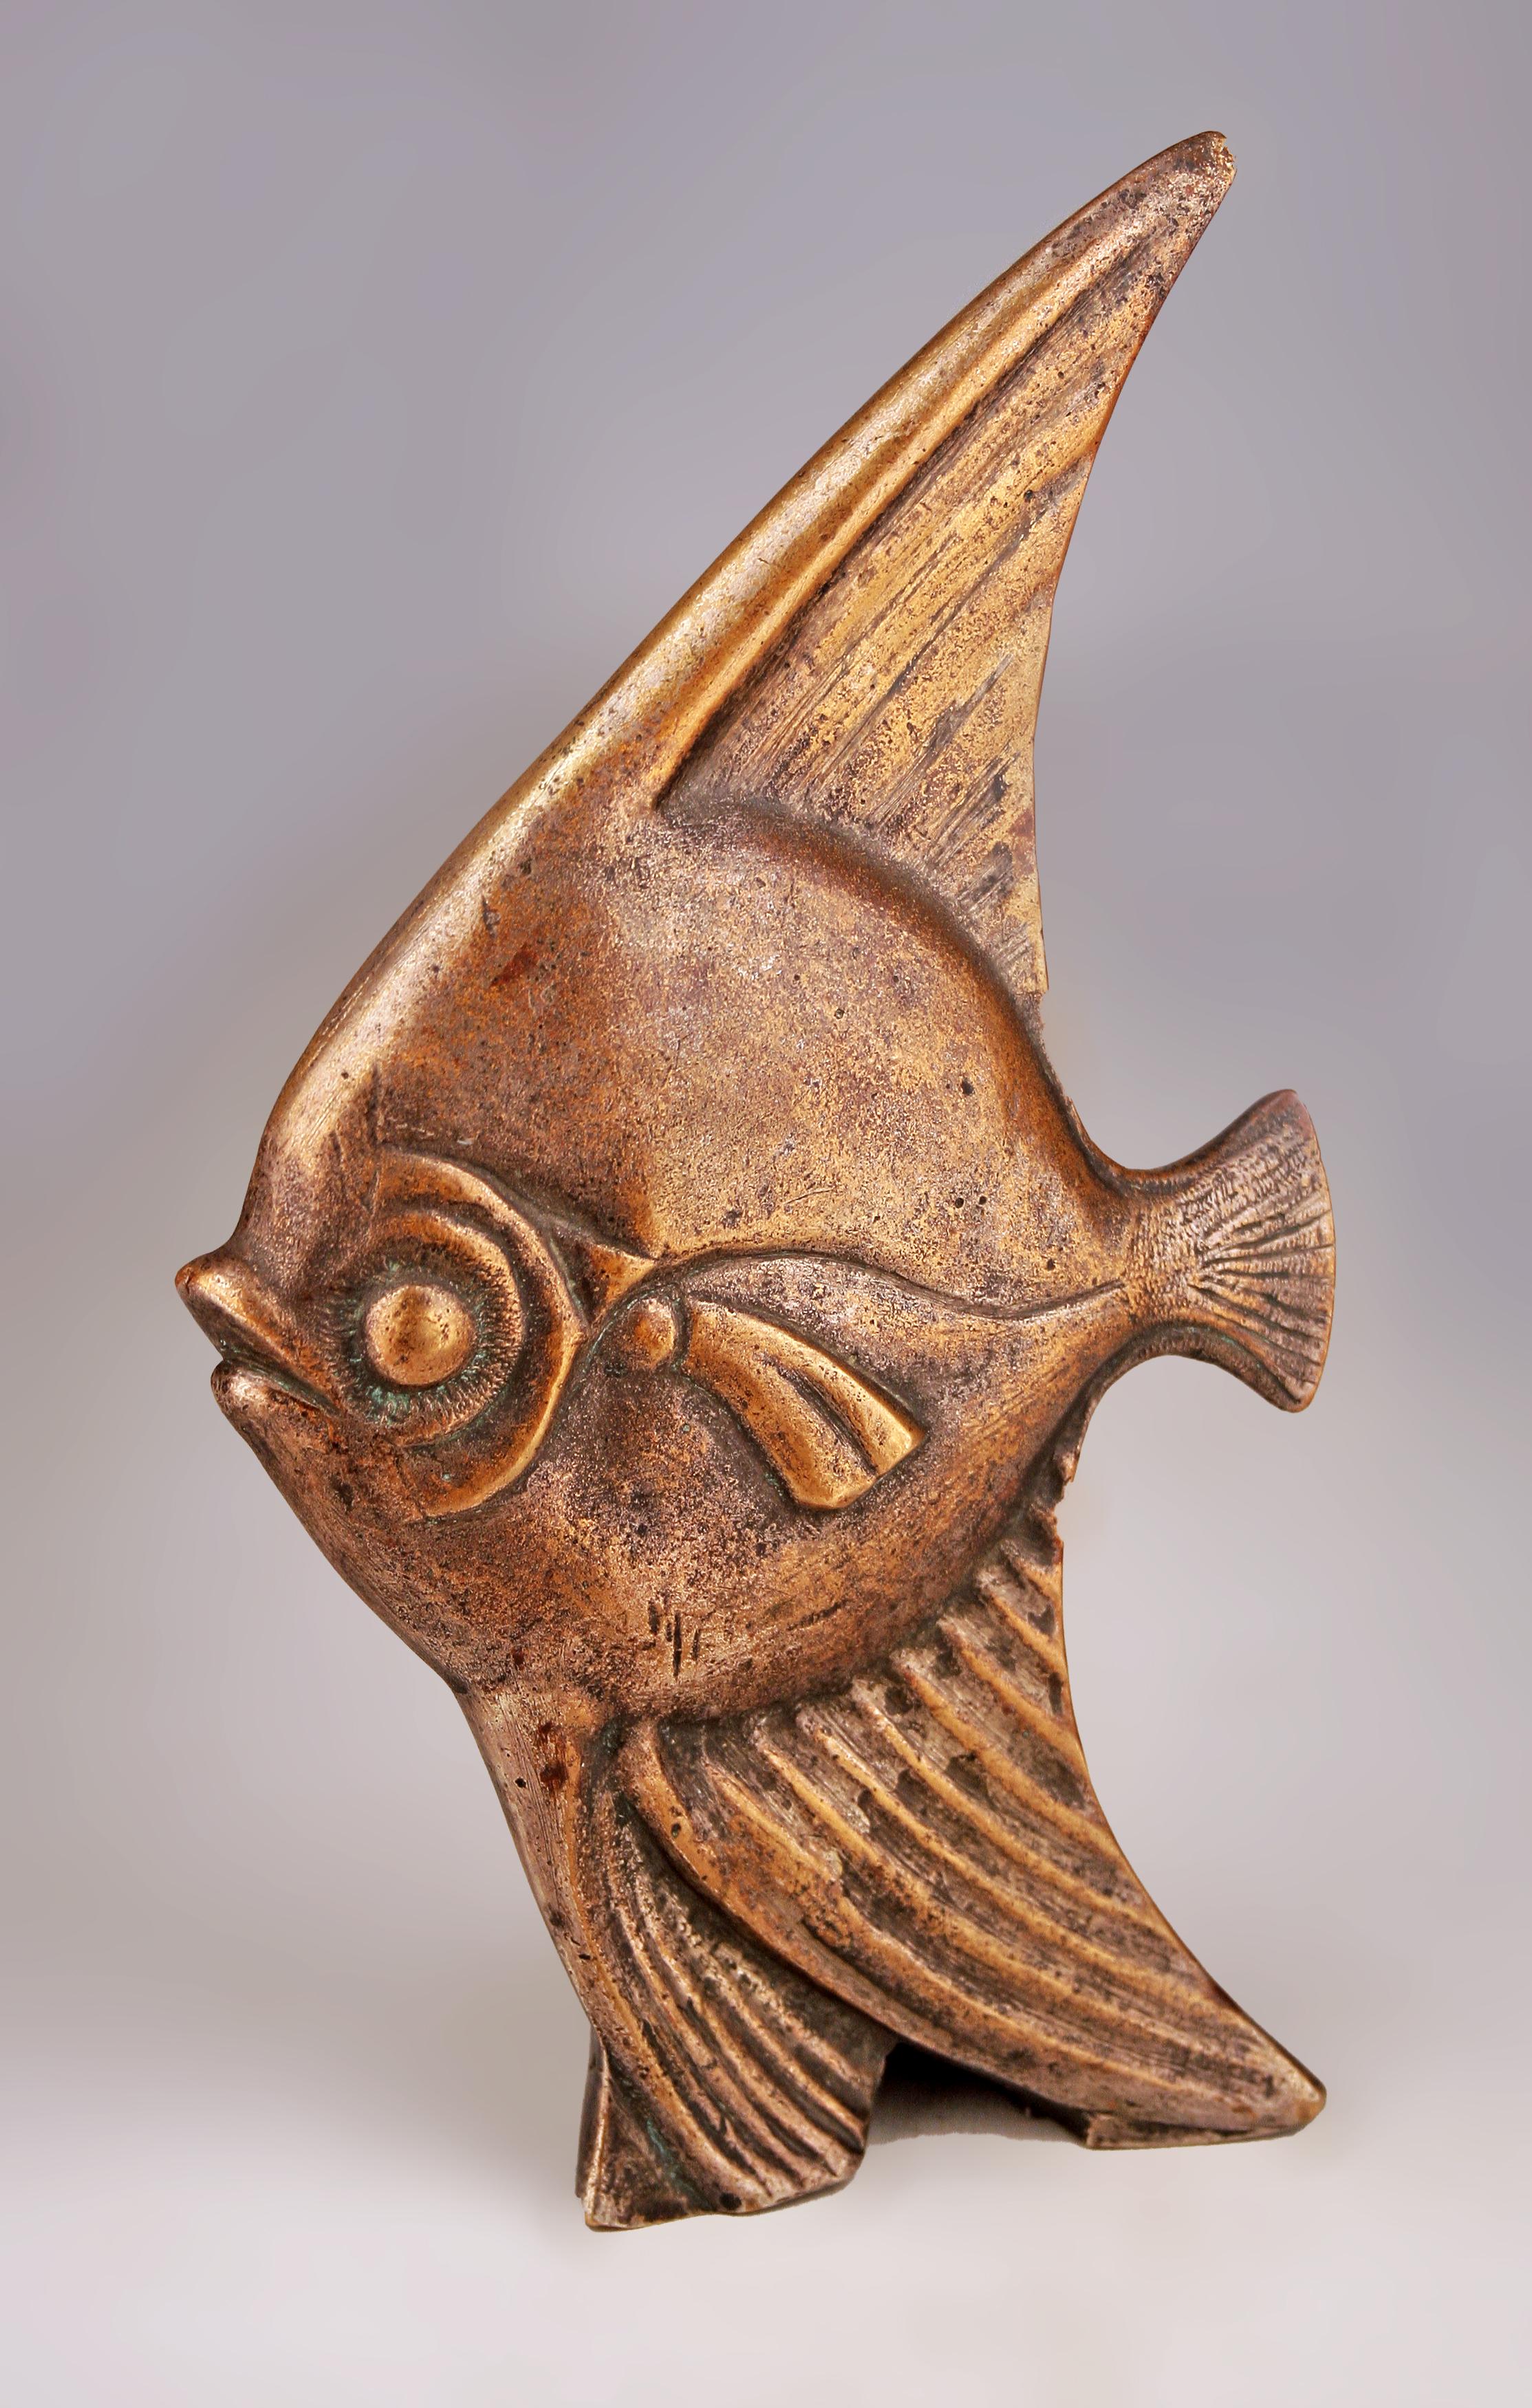 Early 20th century Art Déco french patinated bronze sculpture of an angel fish

By: unknown
Material: bronze, copper, metal
Technique: cast, patinated, molded, metalwork
Dimensions: 2.5 in x 5.5 in x 9.5 in
Date: early 20th century
Style: Art